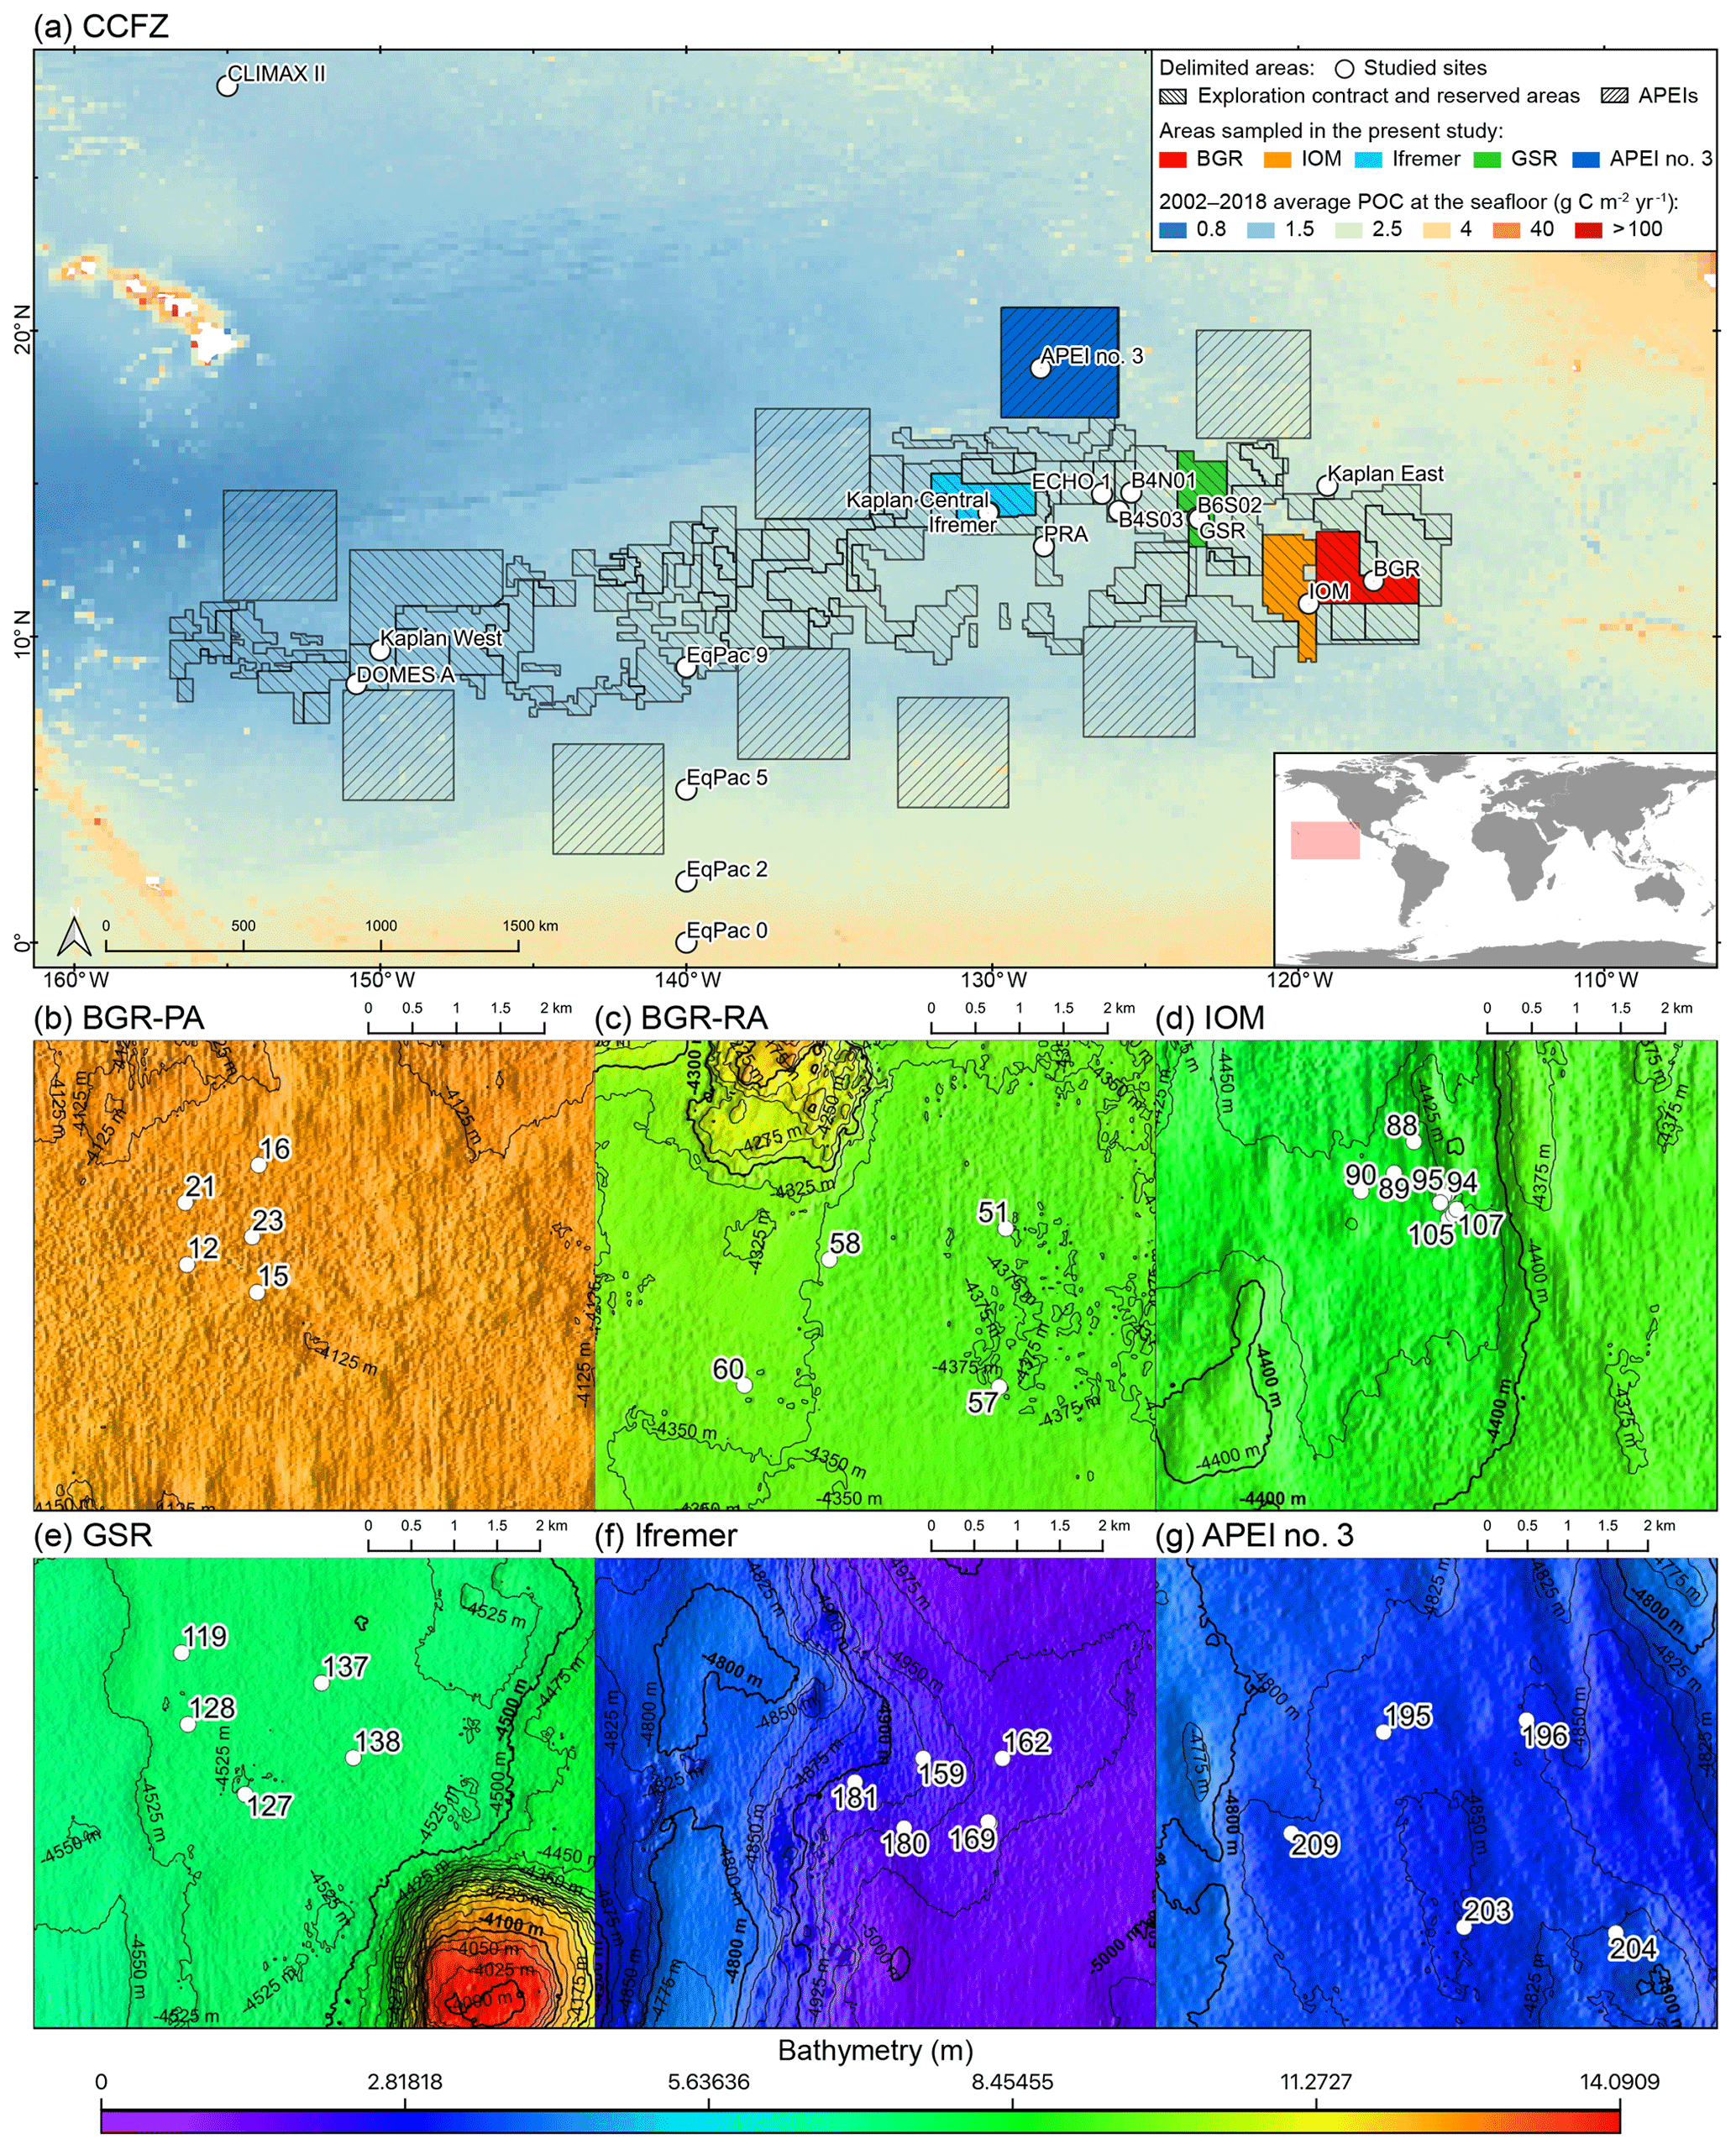 Bg Alpha And Beta Diversity Patterns Of Polychaete Assemblages Across The Nodule Province Of The Eastern Clarion Clipperton Fracture Zone Equatorial Pacific